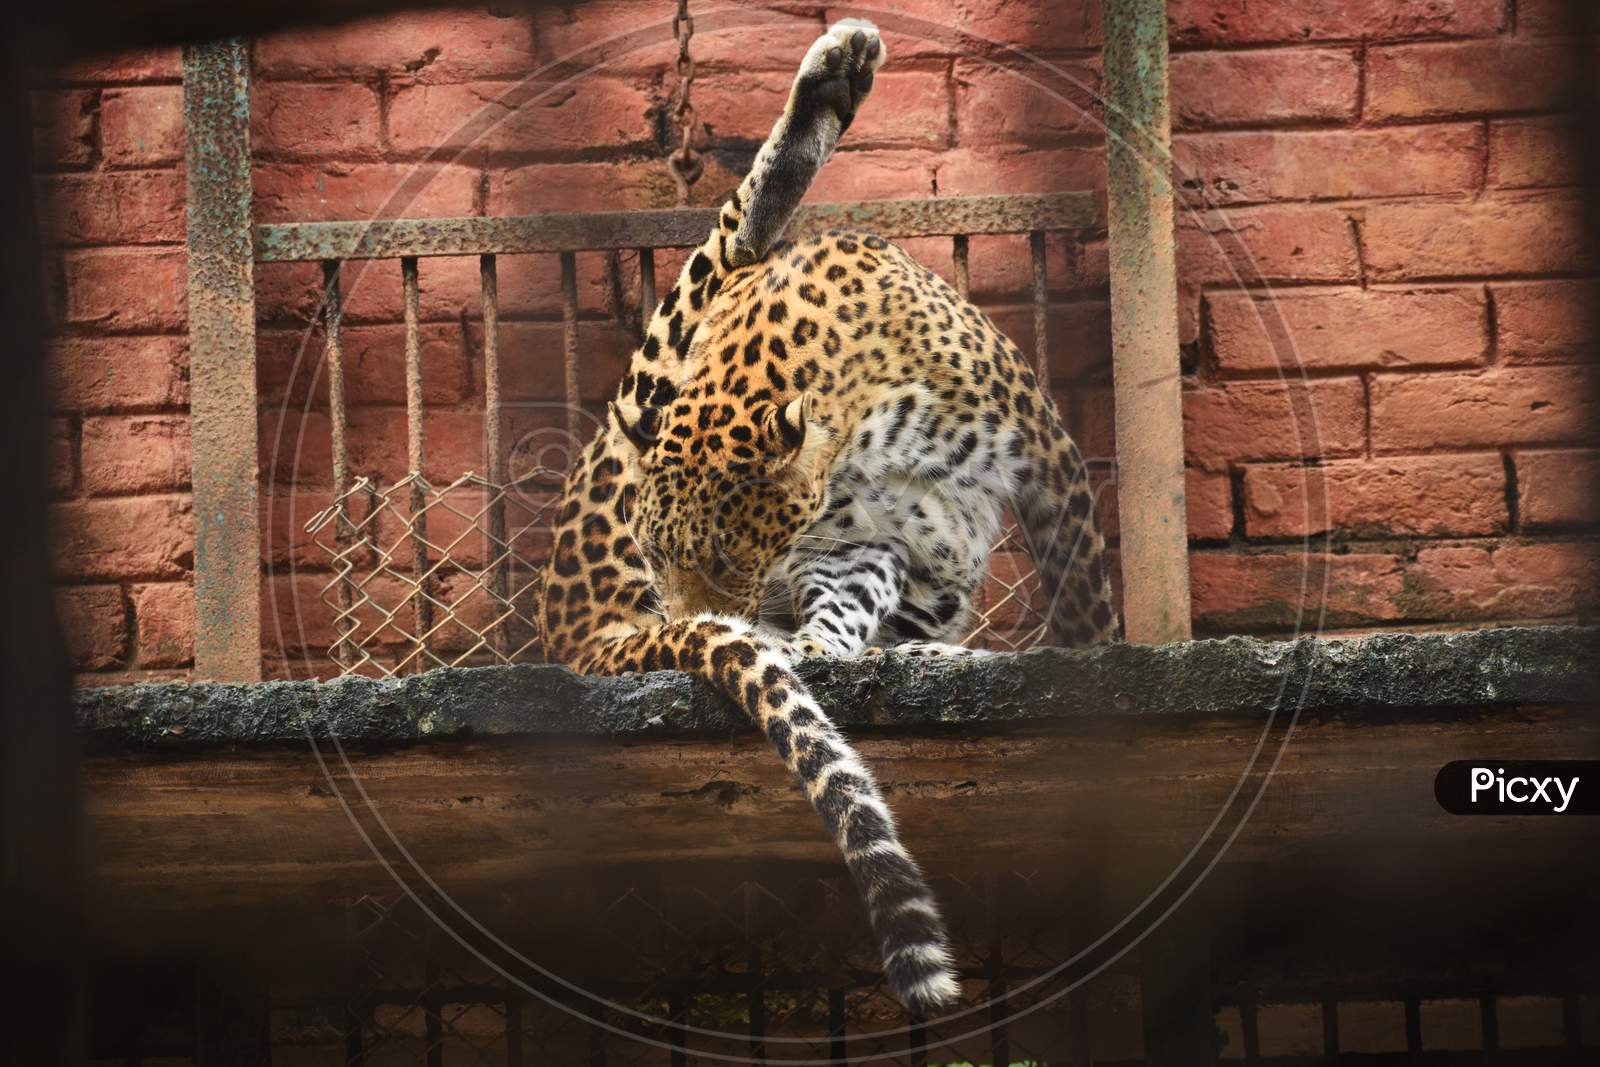 A Leopard In A Zoo Is Licking Its Legs And Body Parts To Cleanup